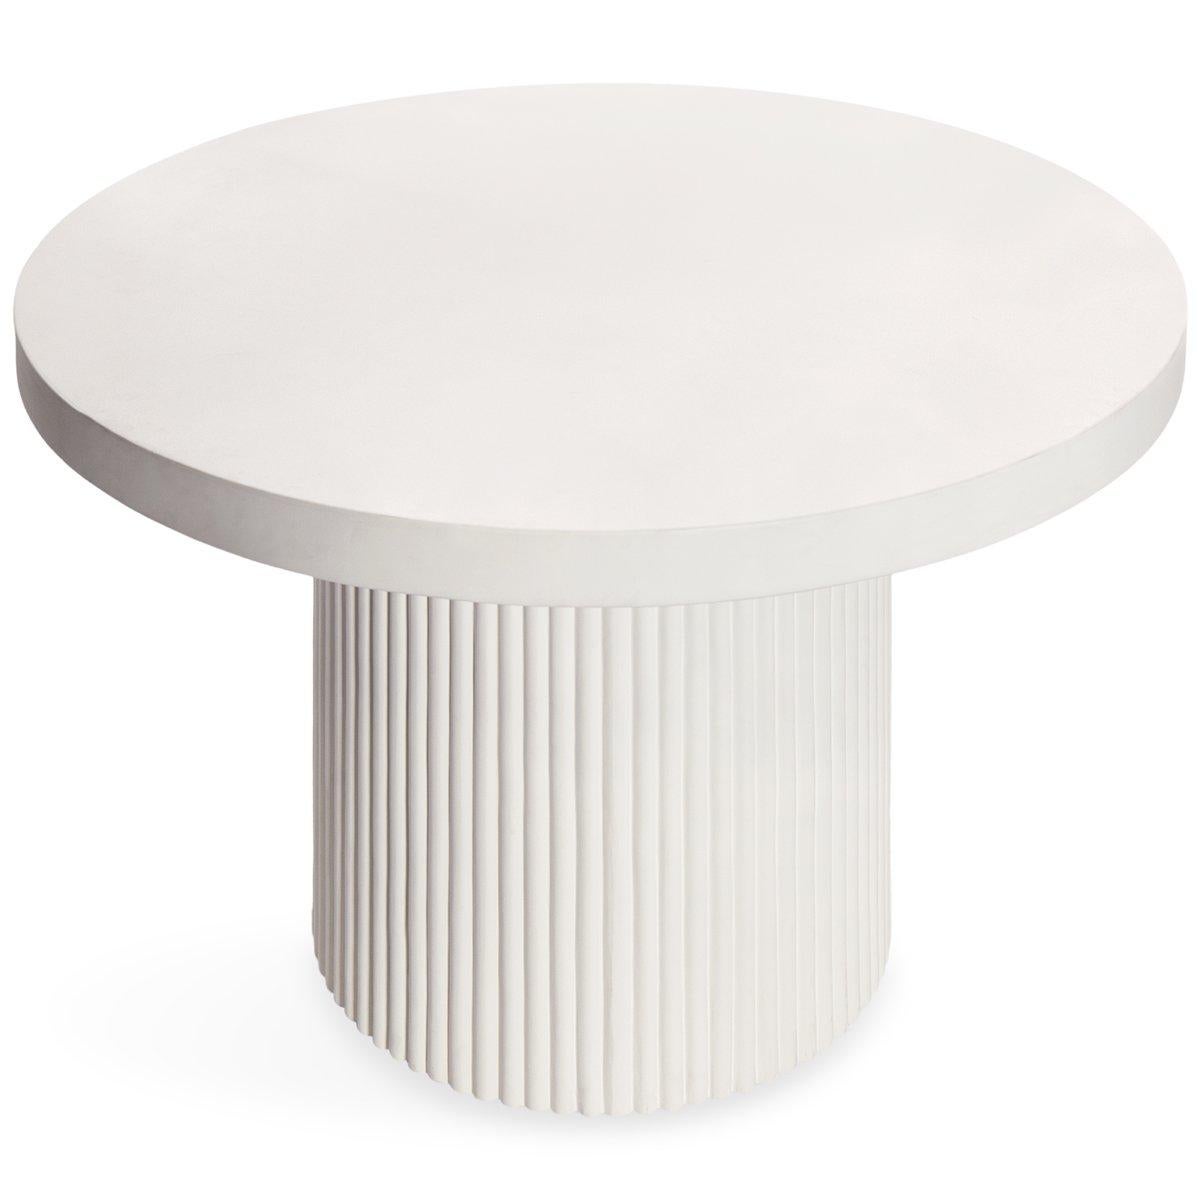 This design features clean lines and vertical reeding on the base. Made of tough, pure white concrete, this table can be used indoors or outside, where ever you want to dine in style! The simplicity of the top provides a great backdrop for all of